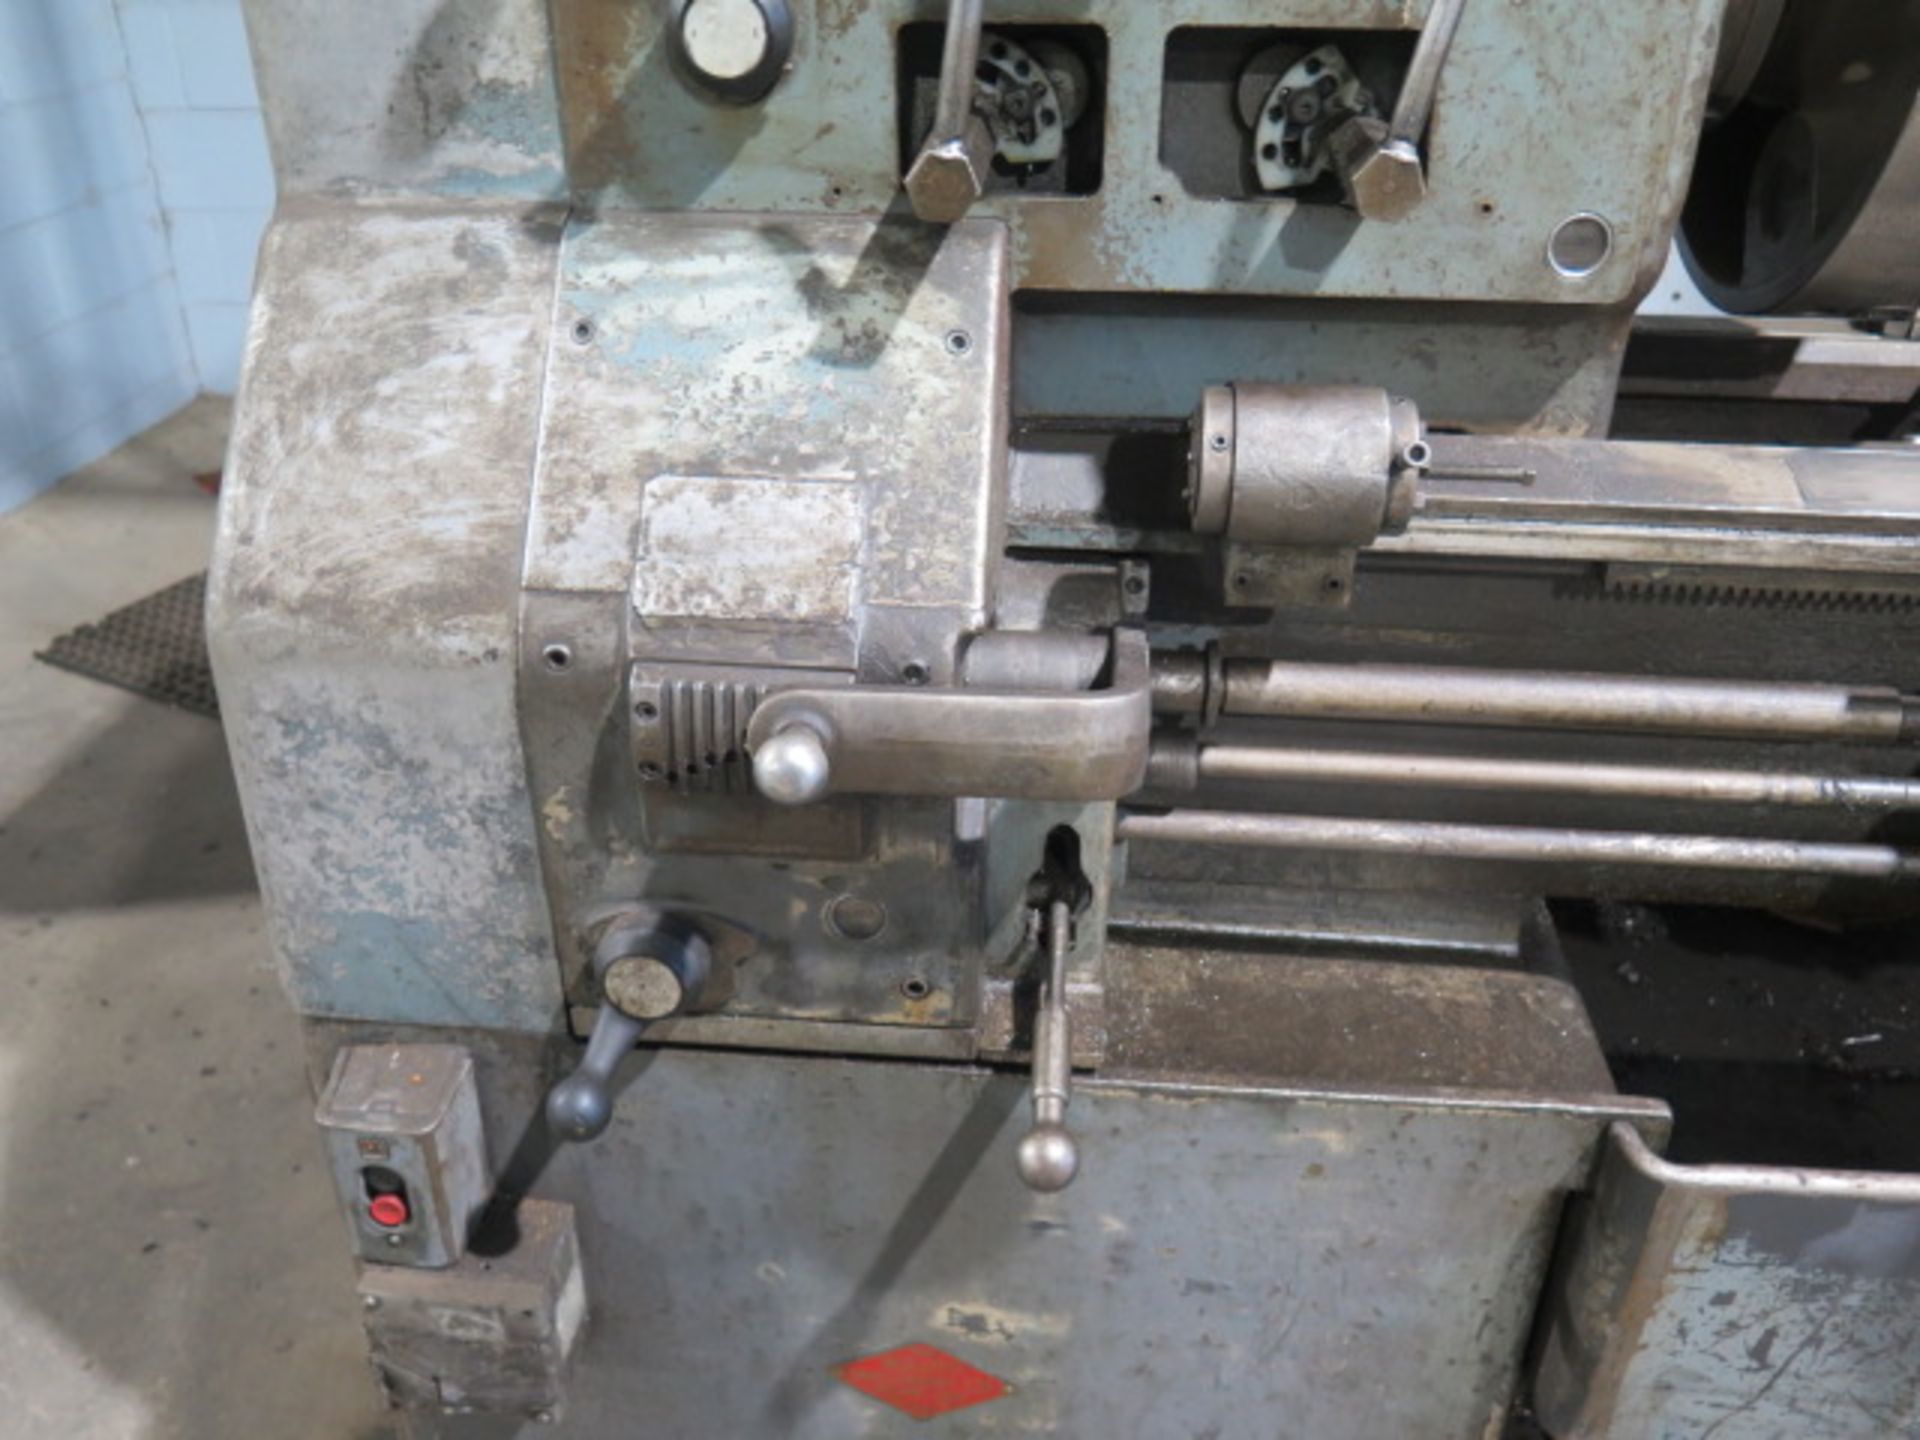 LeBlond 19” x 106” Lathe w/ 25-1000 Dial Change RPM, Inch Threading, Tailstock, (2) Steady Rests, - Image 6 of 11